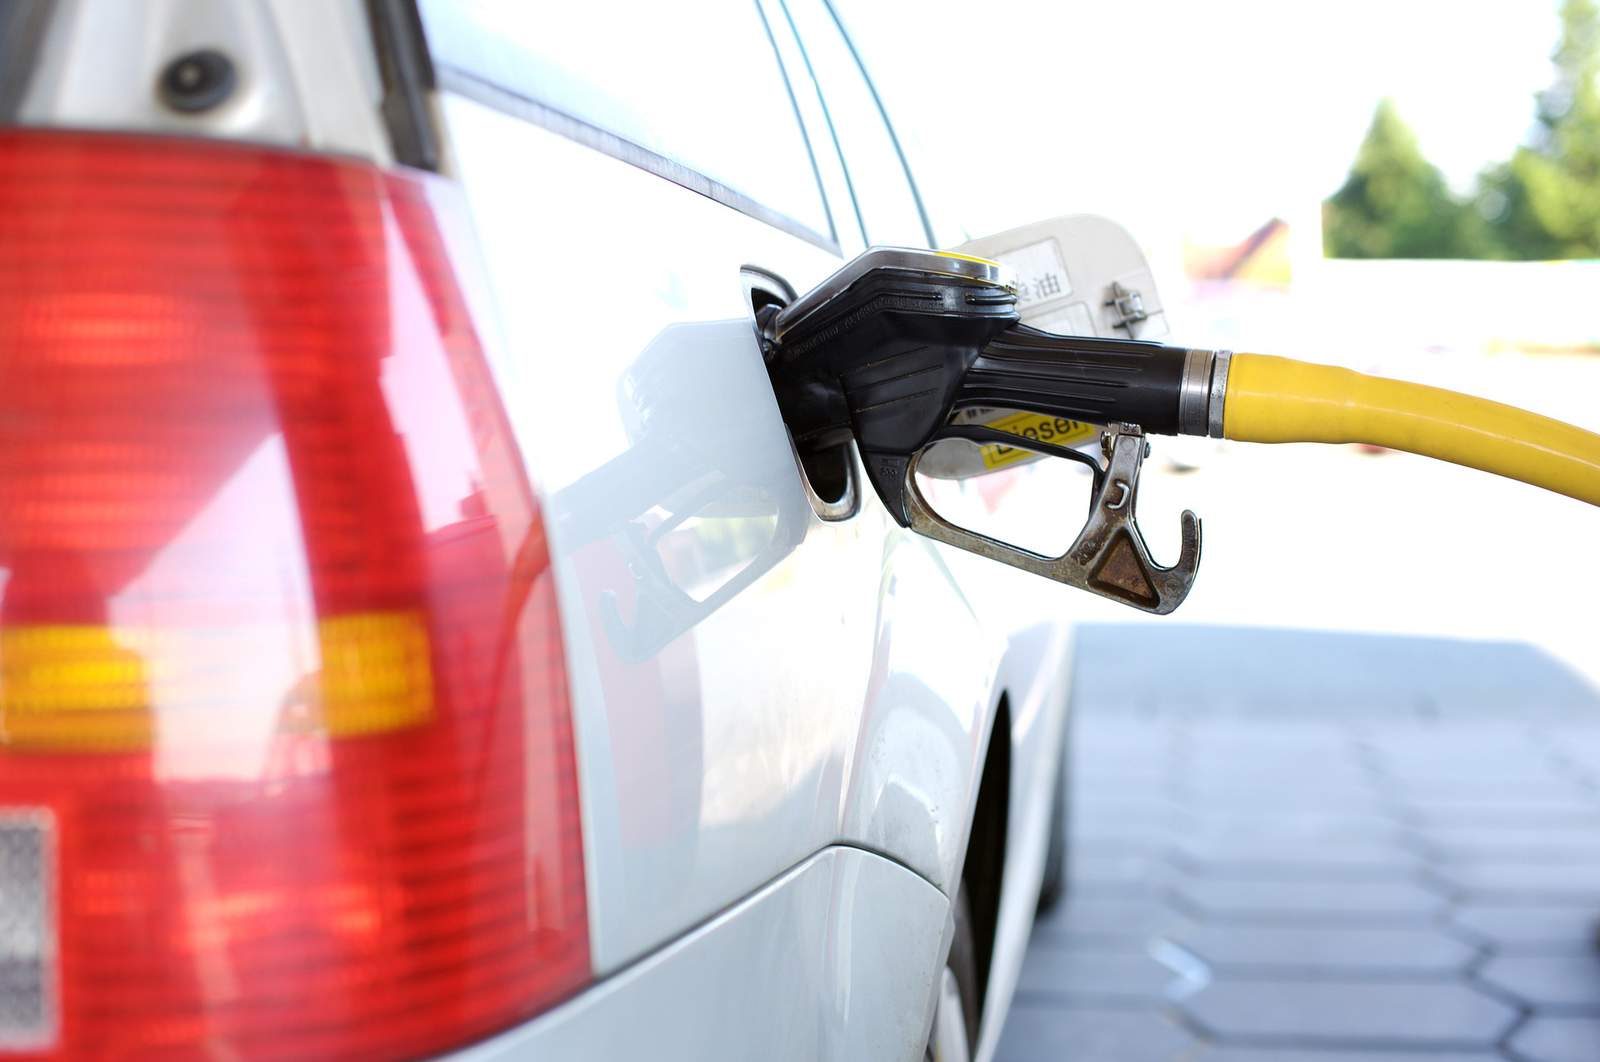 Average US price of gas up 4 cents a gallon to $2.22